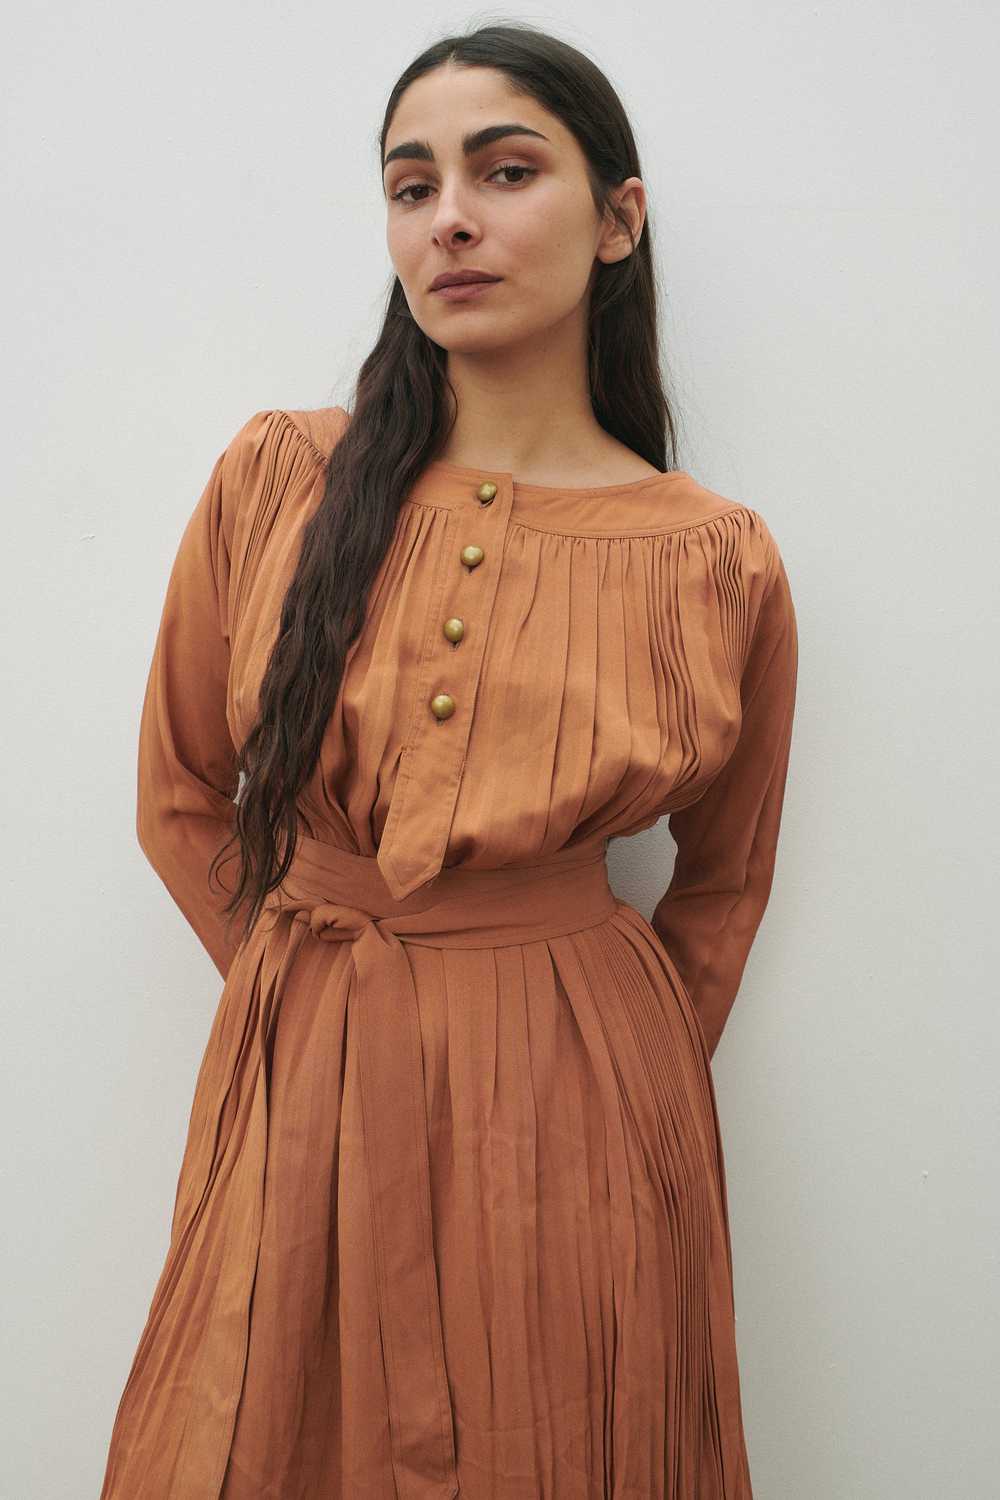 Claire McCardell Orange Pleated Dress - image 2